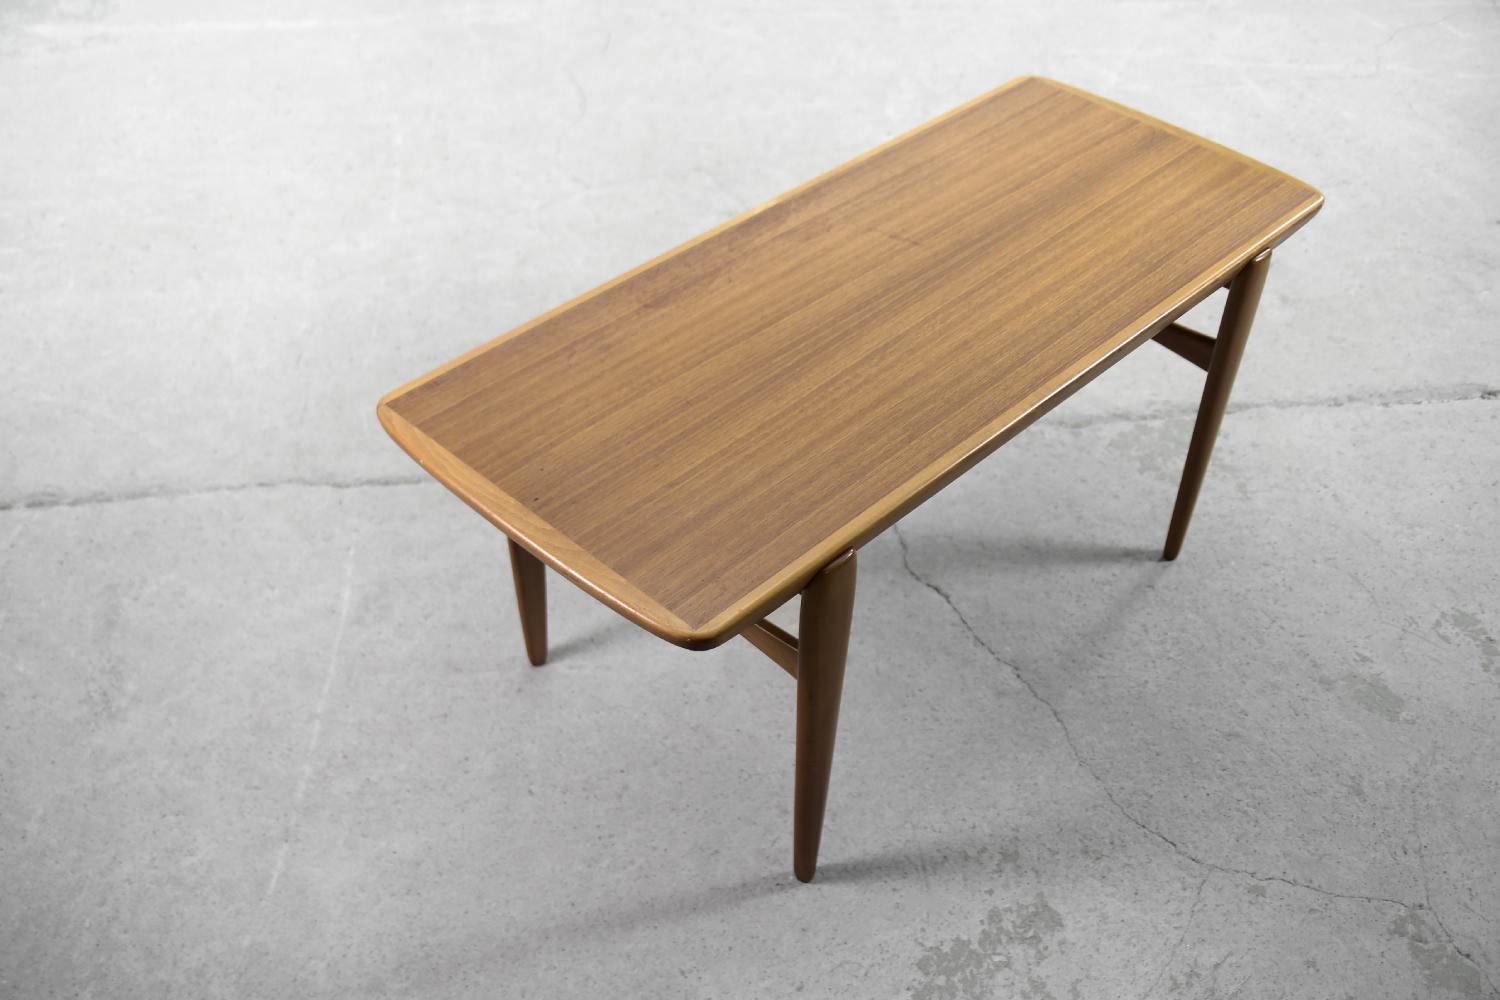 This low coffee table was produced in Sweden during the 1960s. It is made of high-quality teak wood, which is extremely resistant to external factors, and owes its longevity mainly to a specific composition, rich in oily substances and silicic acid.